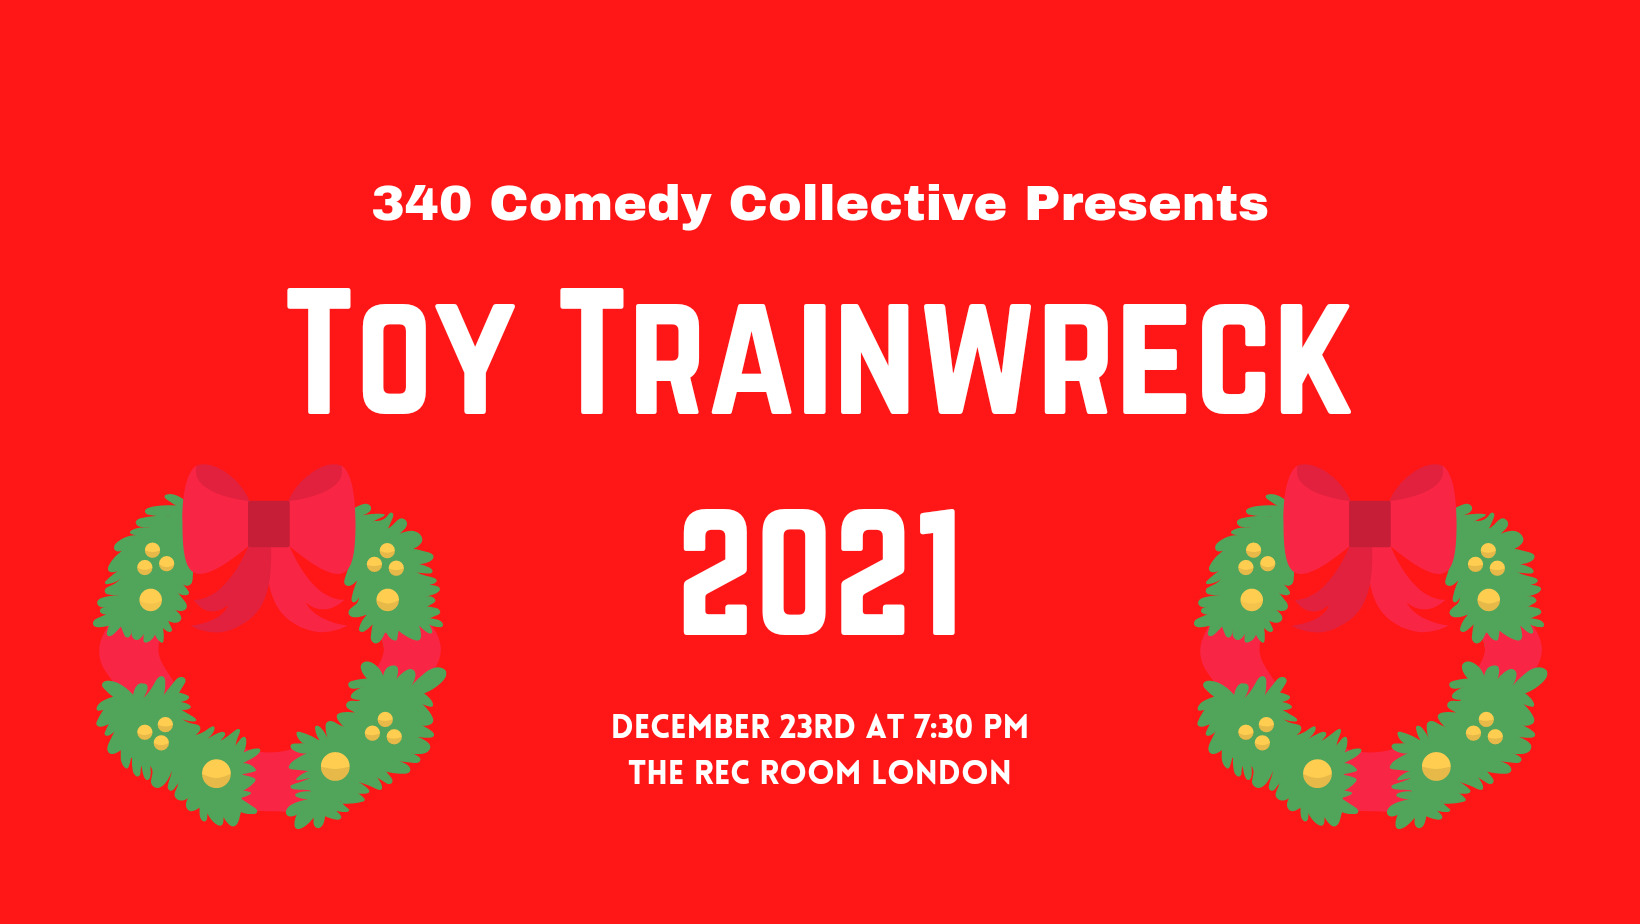 340 Comedy Collective Presents Toy Trainwreck 2021